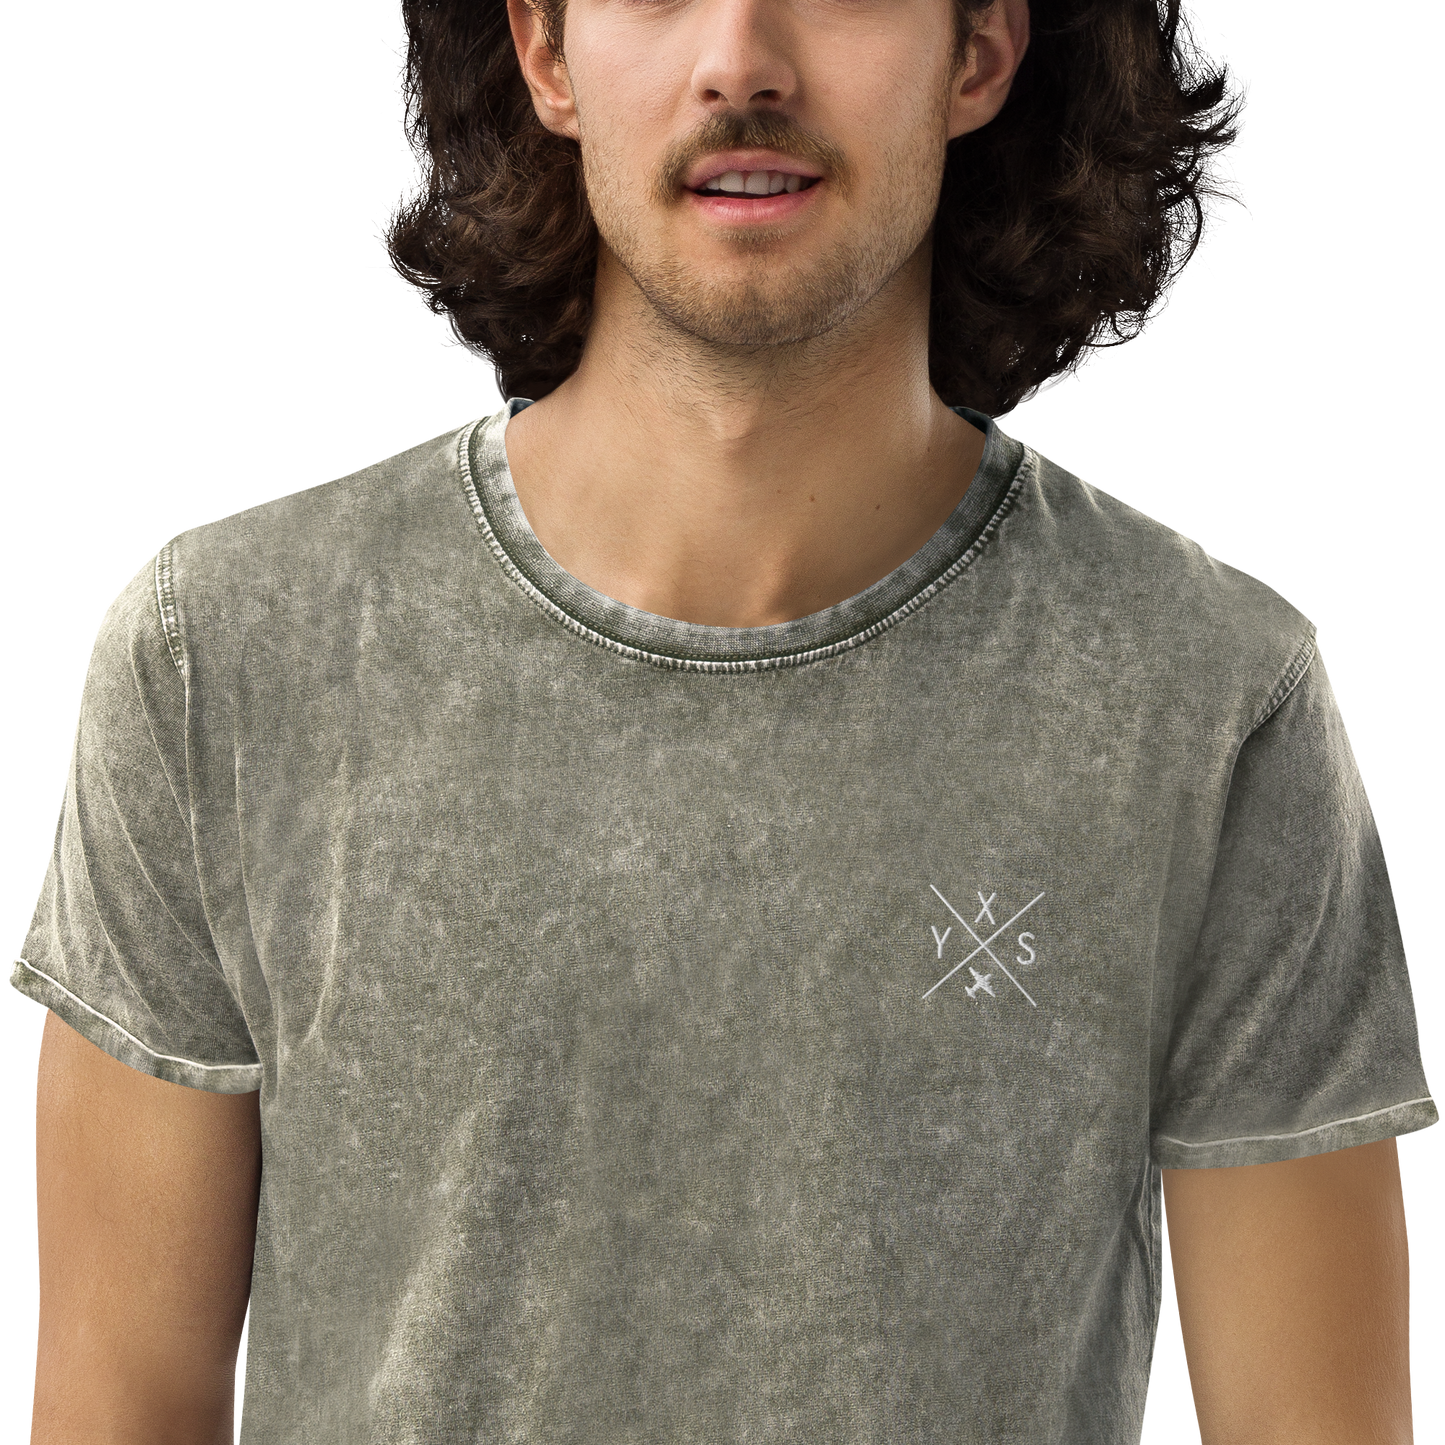 YHM Designs - YXS Prince George Denim T-Shirt - Crossed-X Design with Airport Code and Vintage Propliner - White Embroidery - Image 11